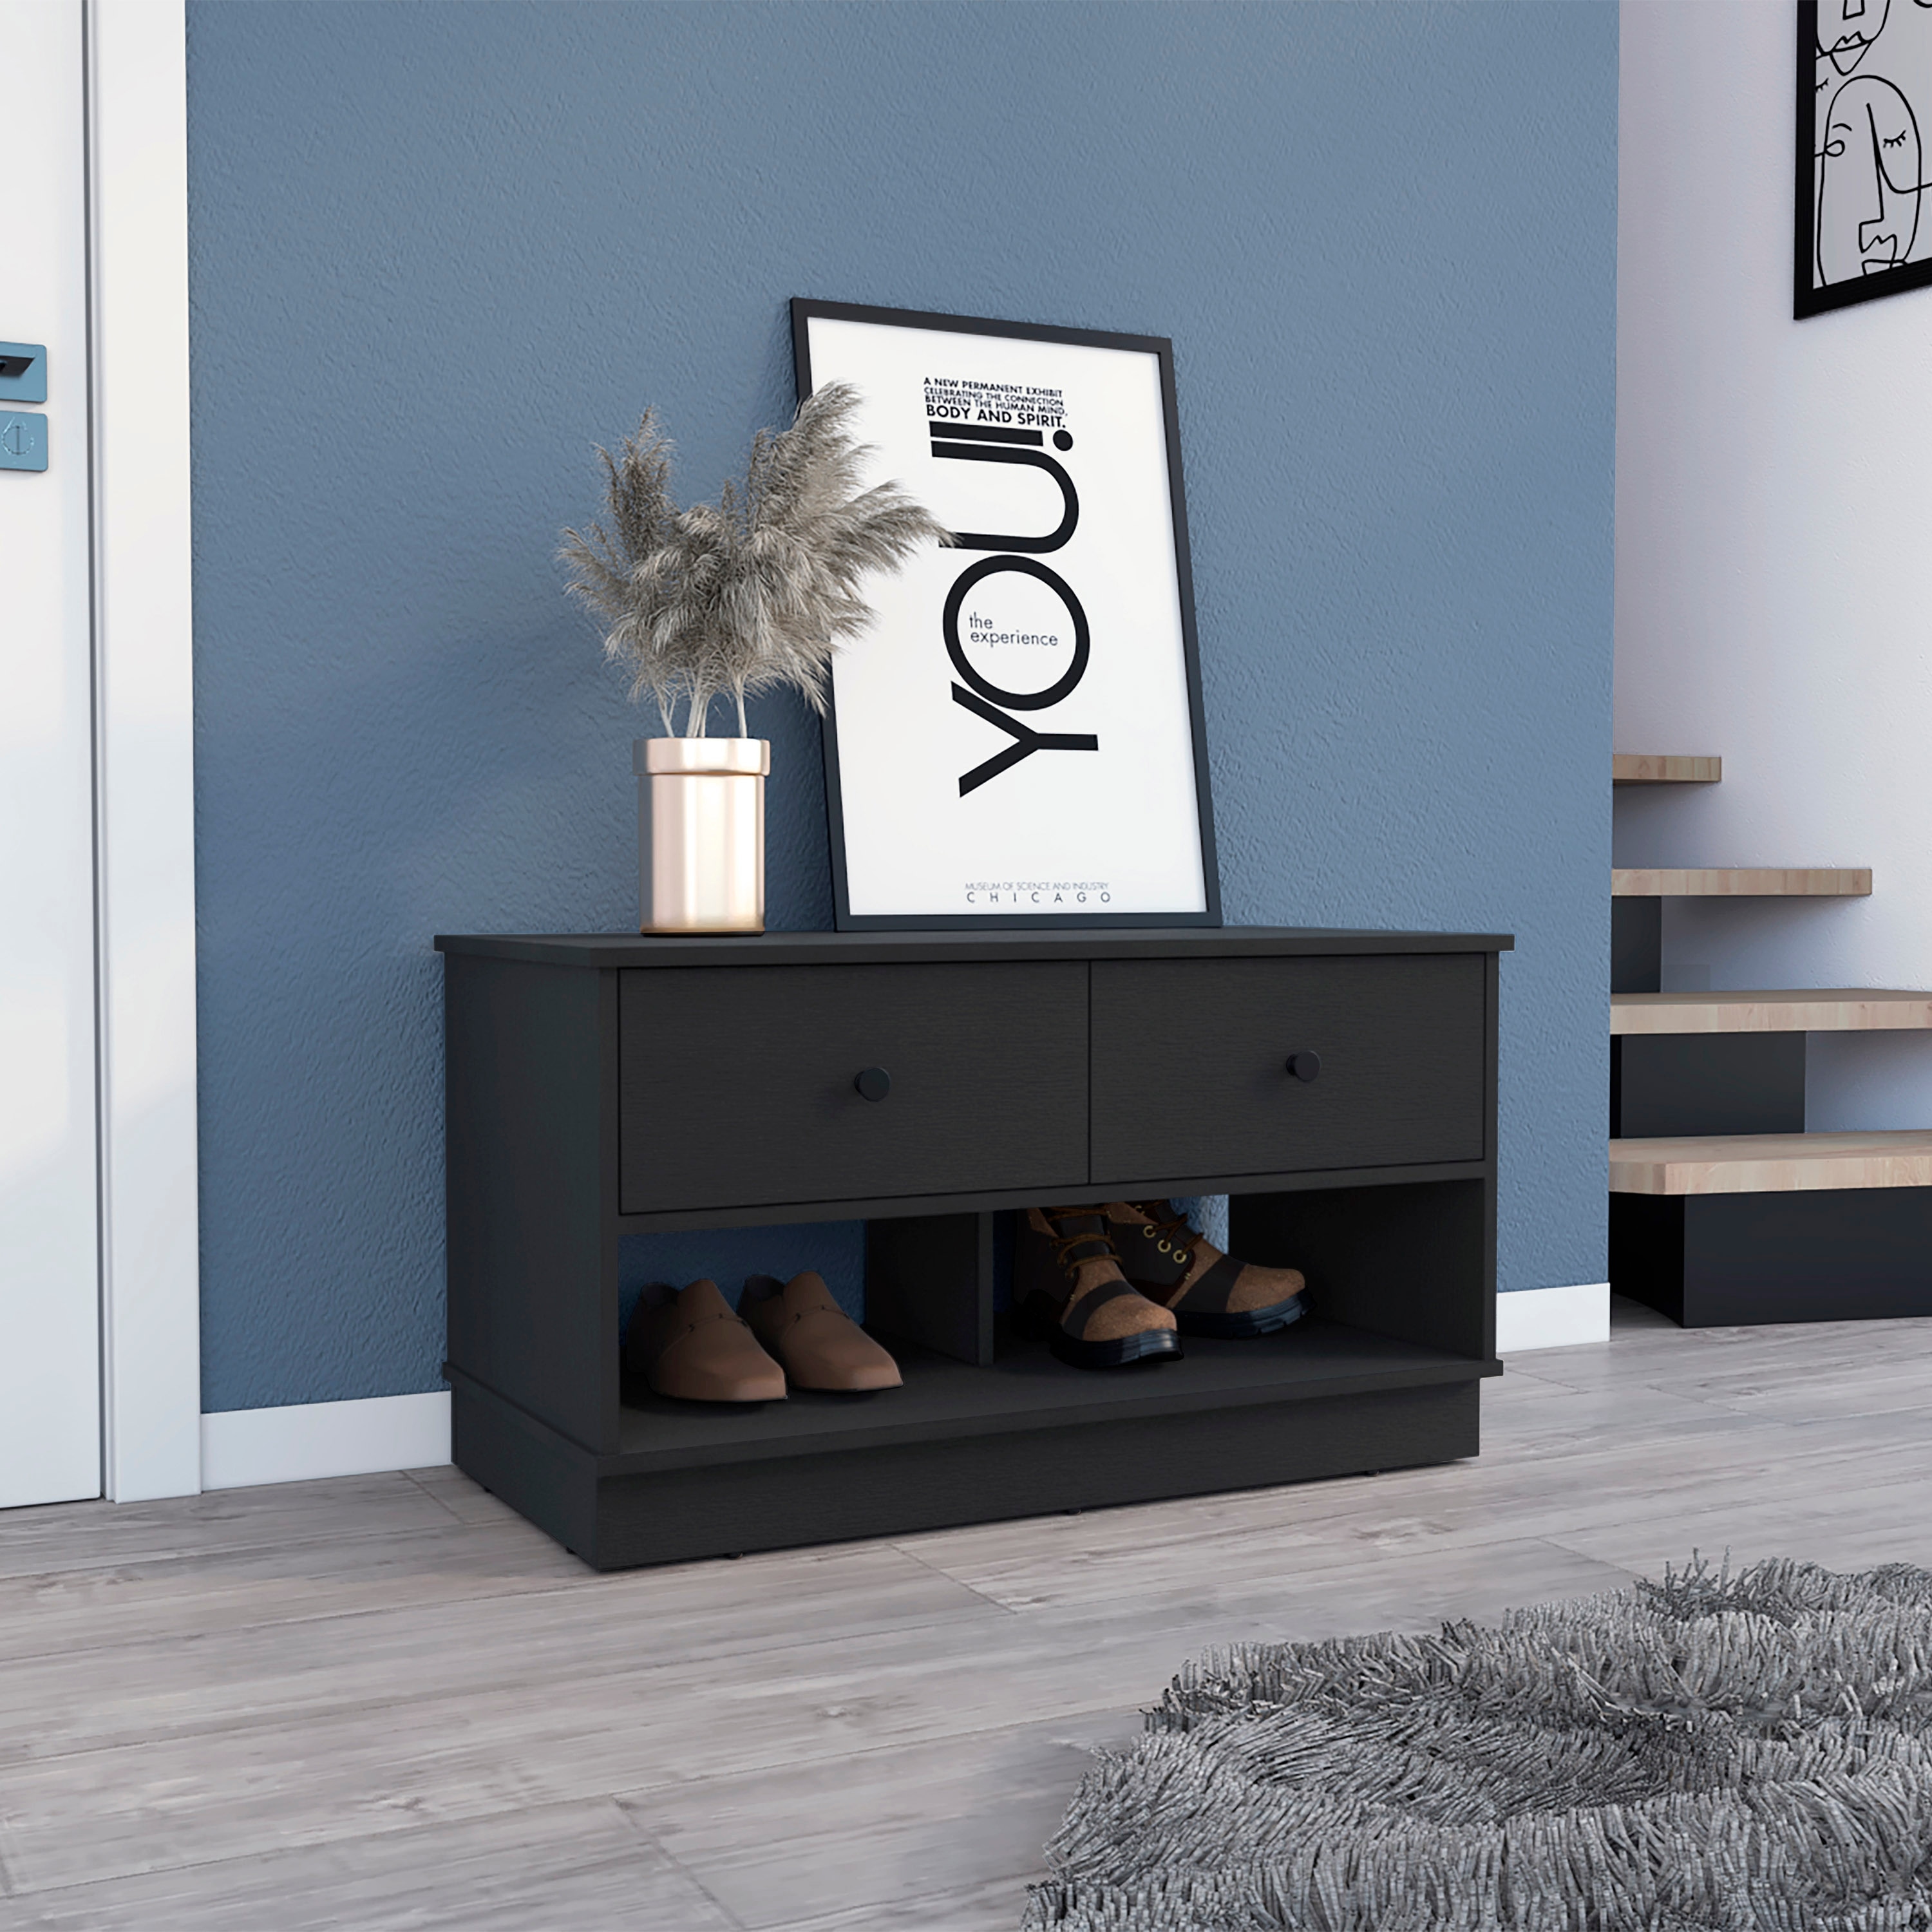 https://ak1.ostkcdn.com/images/products/is/images/direct/bbd4ac46d42229a7c9f1964e20b07414ce11c46d/Particle-Board-Storage-Benches-modern-Entryway-Benches-with-2-Drawers-%26-2-Shelves-Standard-Benches-for-Living-Room-%26-Doorstep.jpg